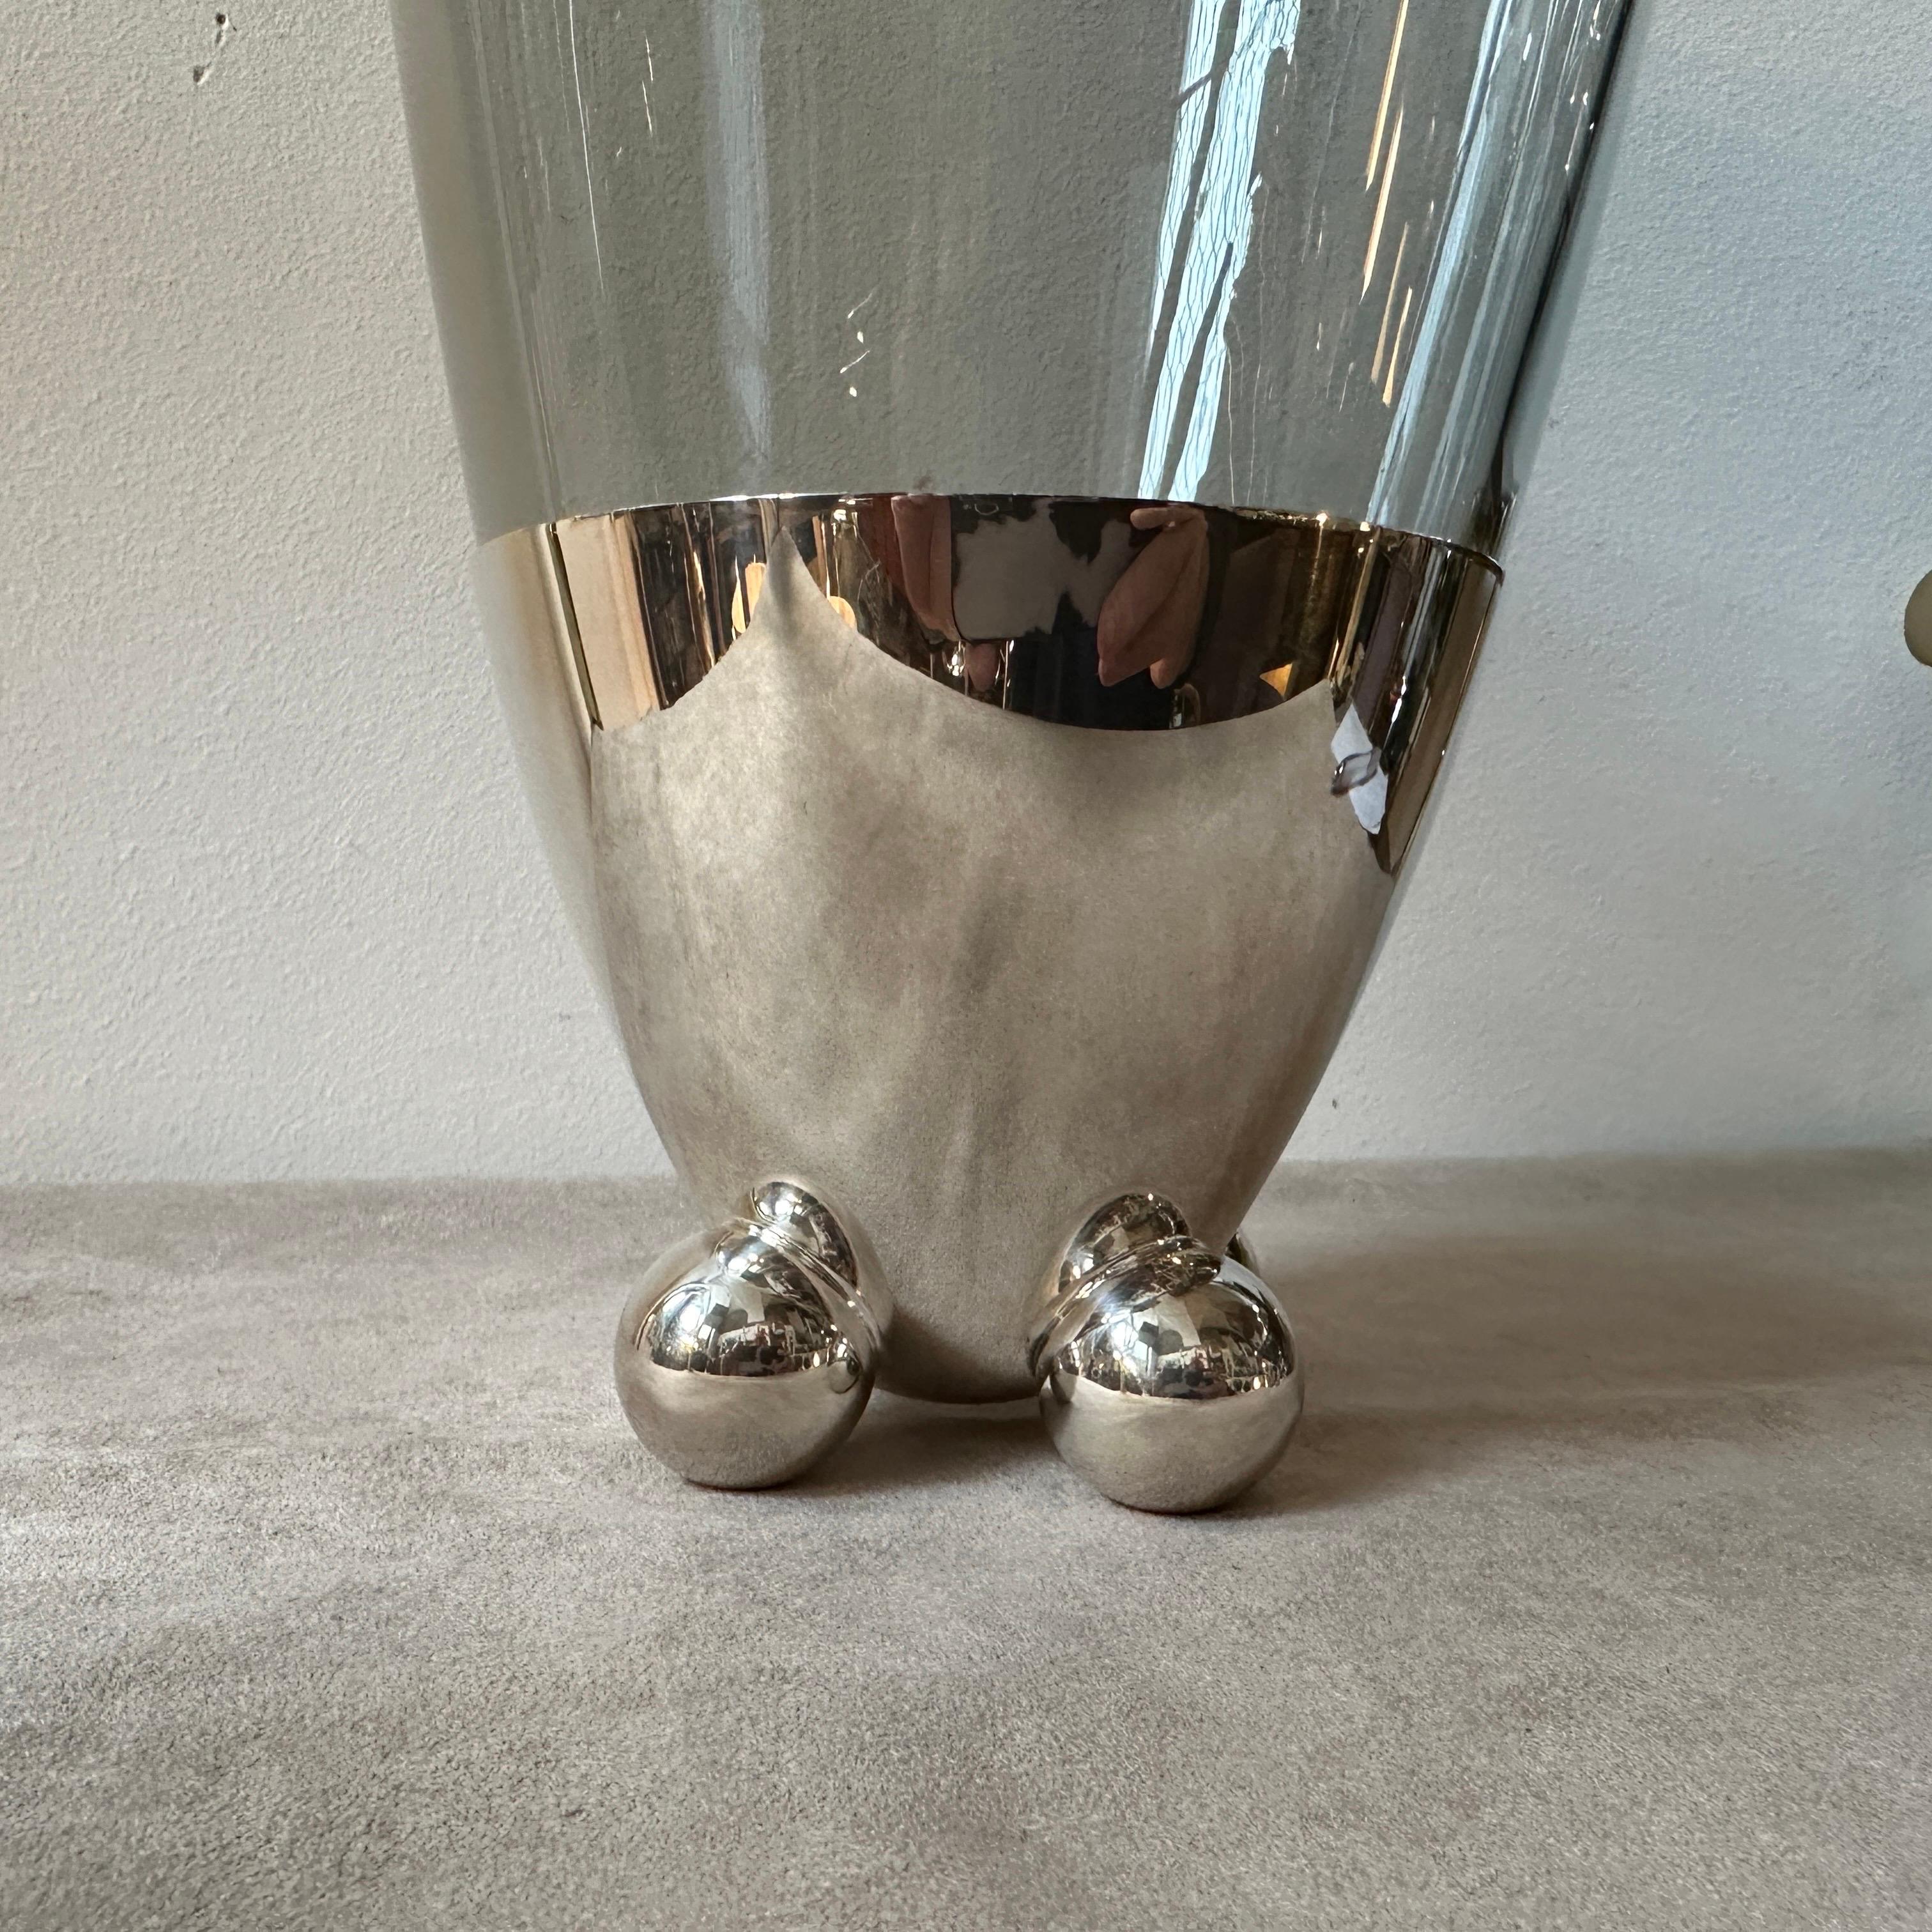 1990s Space Age Silver Plated Atomes Vase by Richard Hutten for Christofle For Sale 2